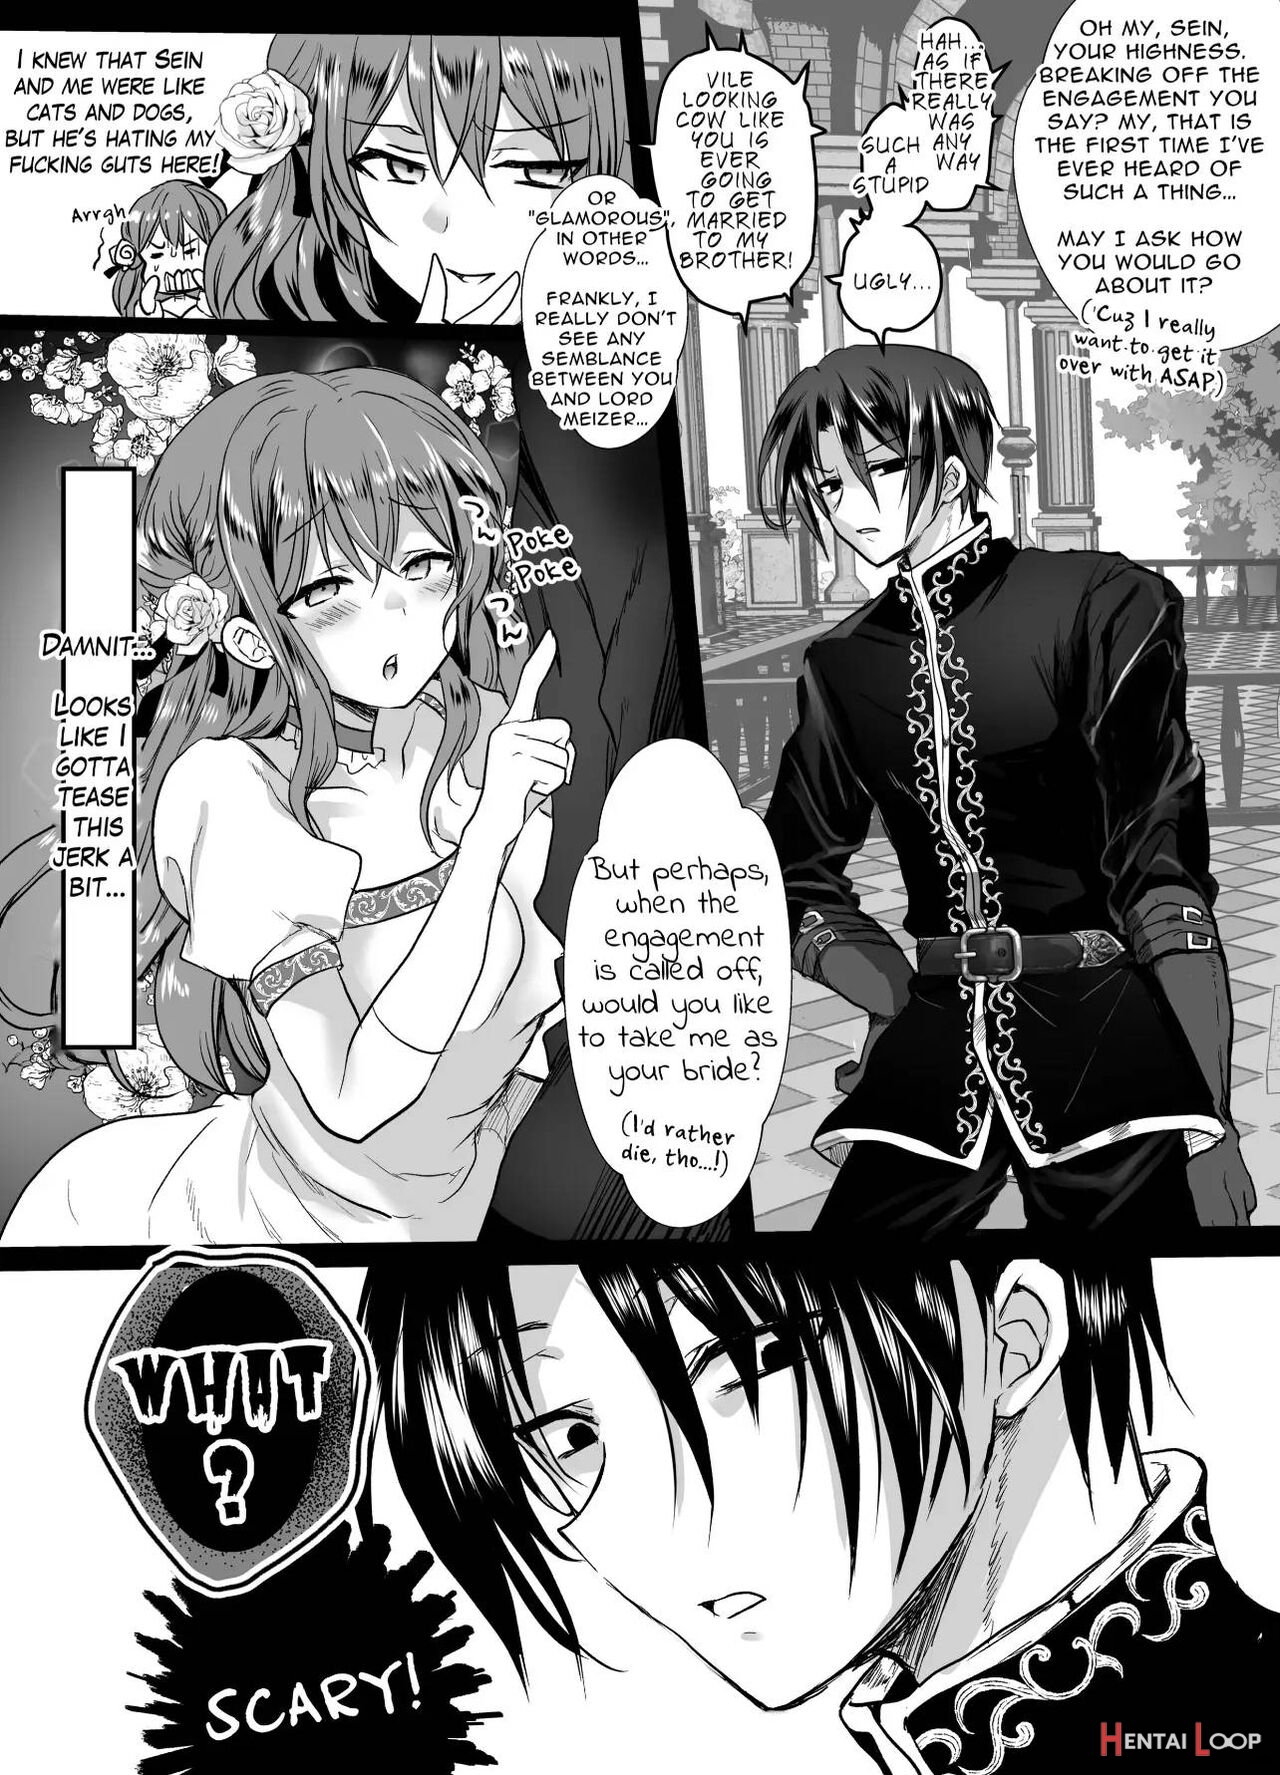  jk's Tragic Isekai Reincarnation As The Villainess ~but My Precious Side Character!~ page 13